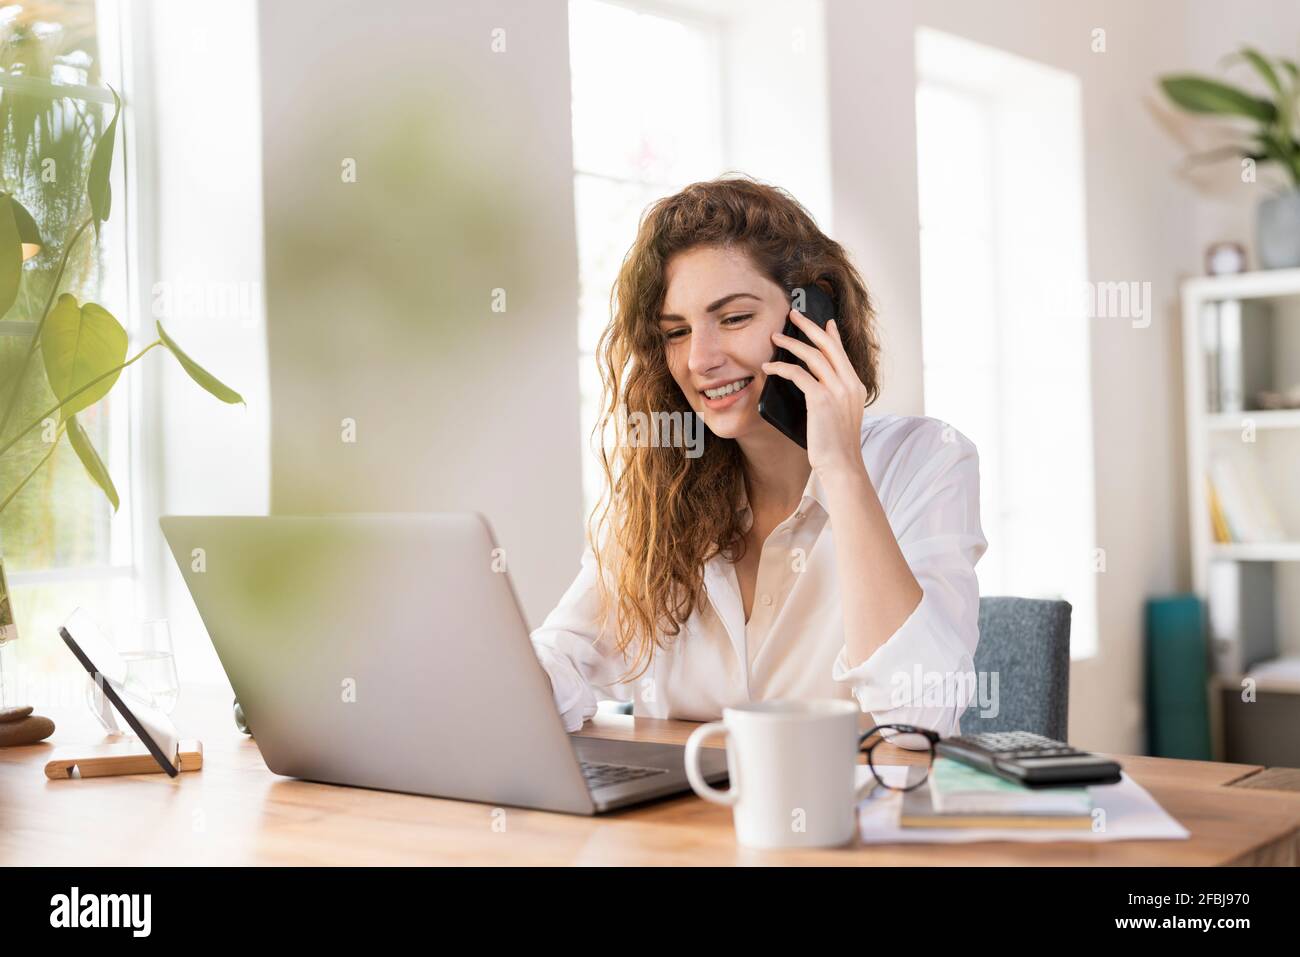 Contented female entrepreneur talking on smart phone while using laptop at desk in home office Stock Photo